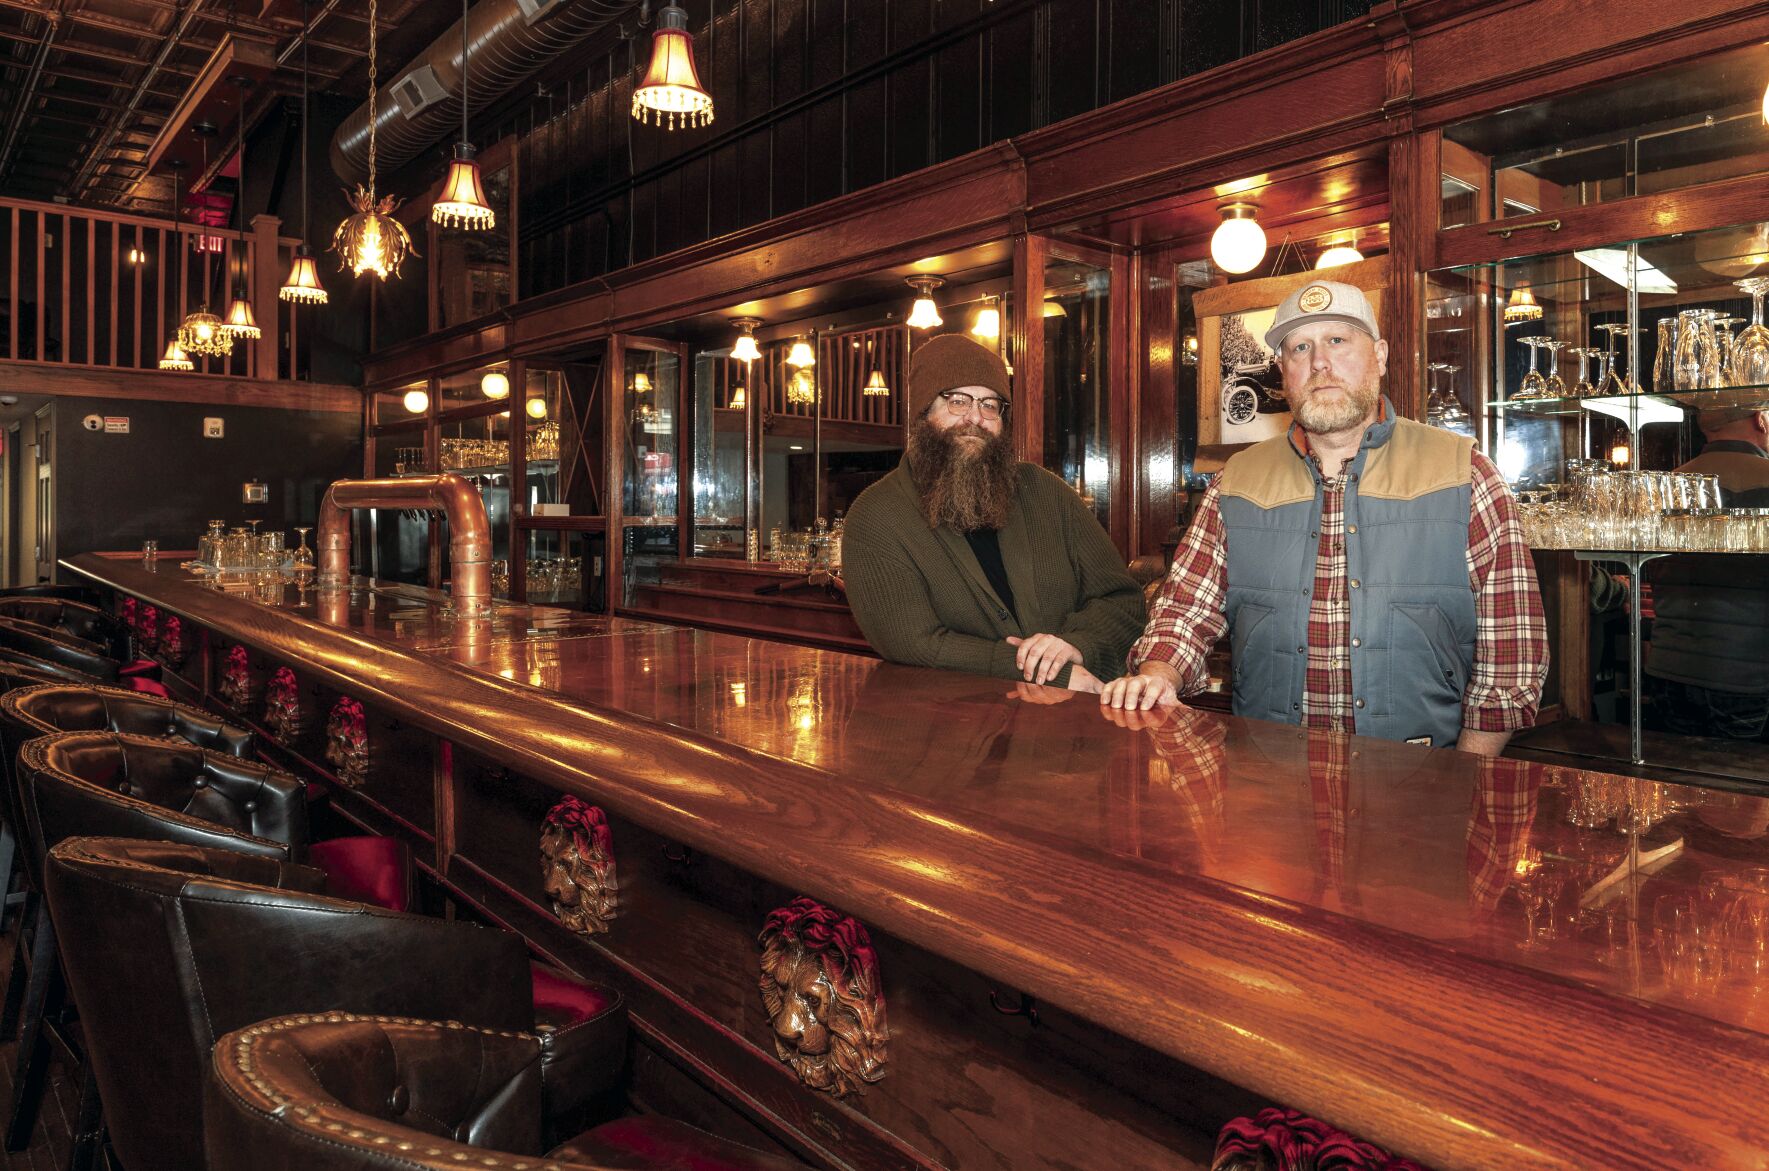 Co-owners Mike (left) and Matt Blaum inside the bar they are remodeling in preparation to open a second location in Galena, Ill. The Main Street business will feature two bars with cocktails, full bottles and food.    PHOTO CREDIT: Stephen Gassman